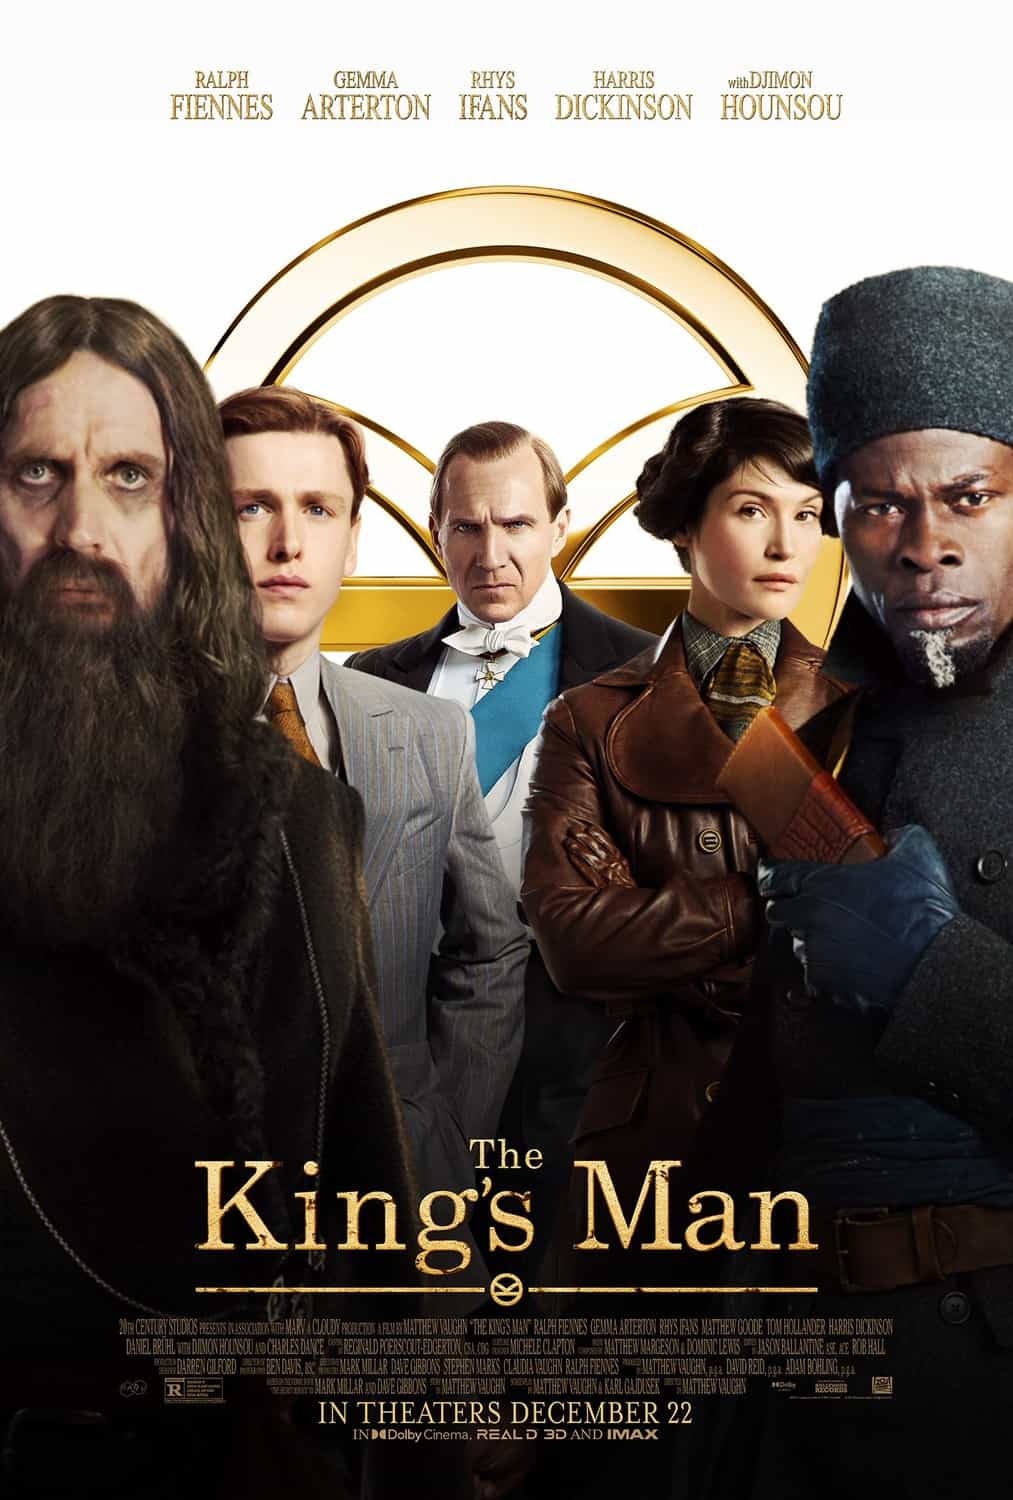 New poster release for The Kings Man starring Ralph Fiennes - movie release date 18th September 2020